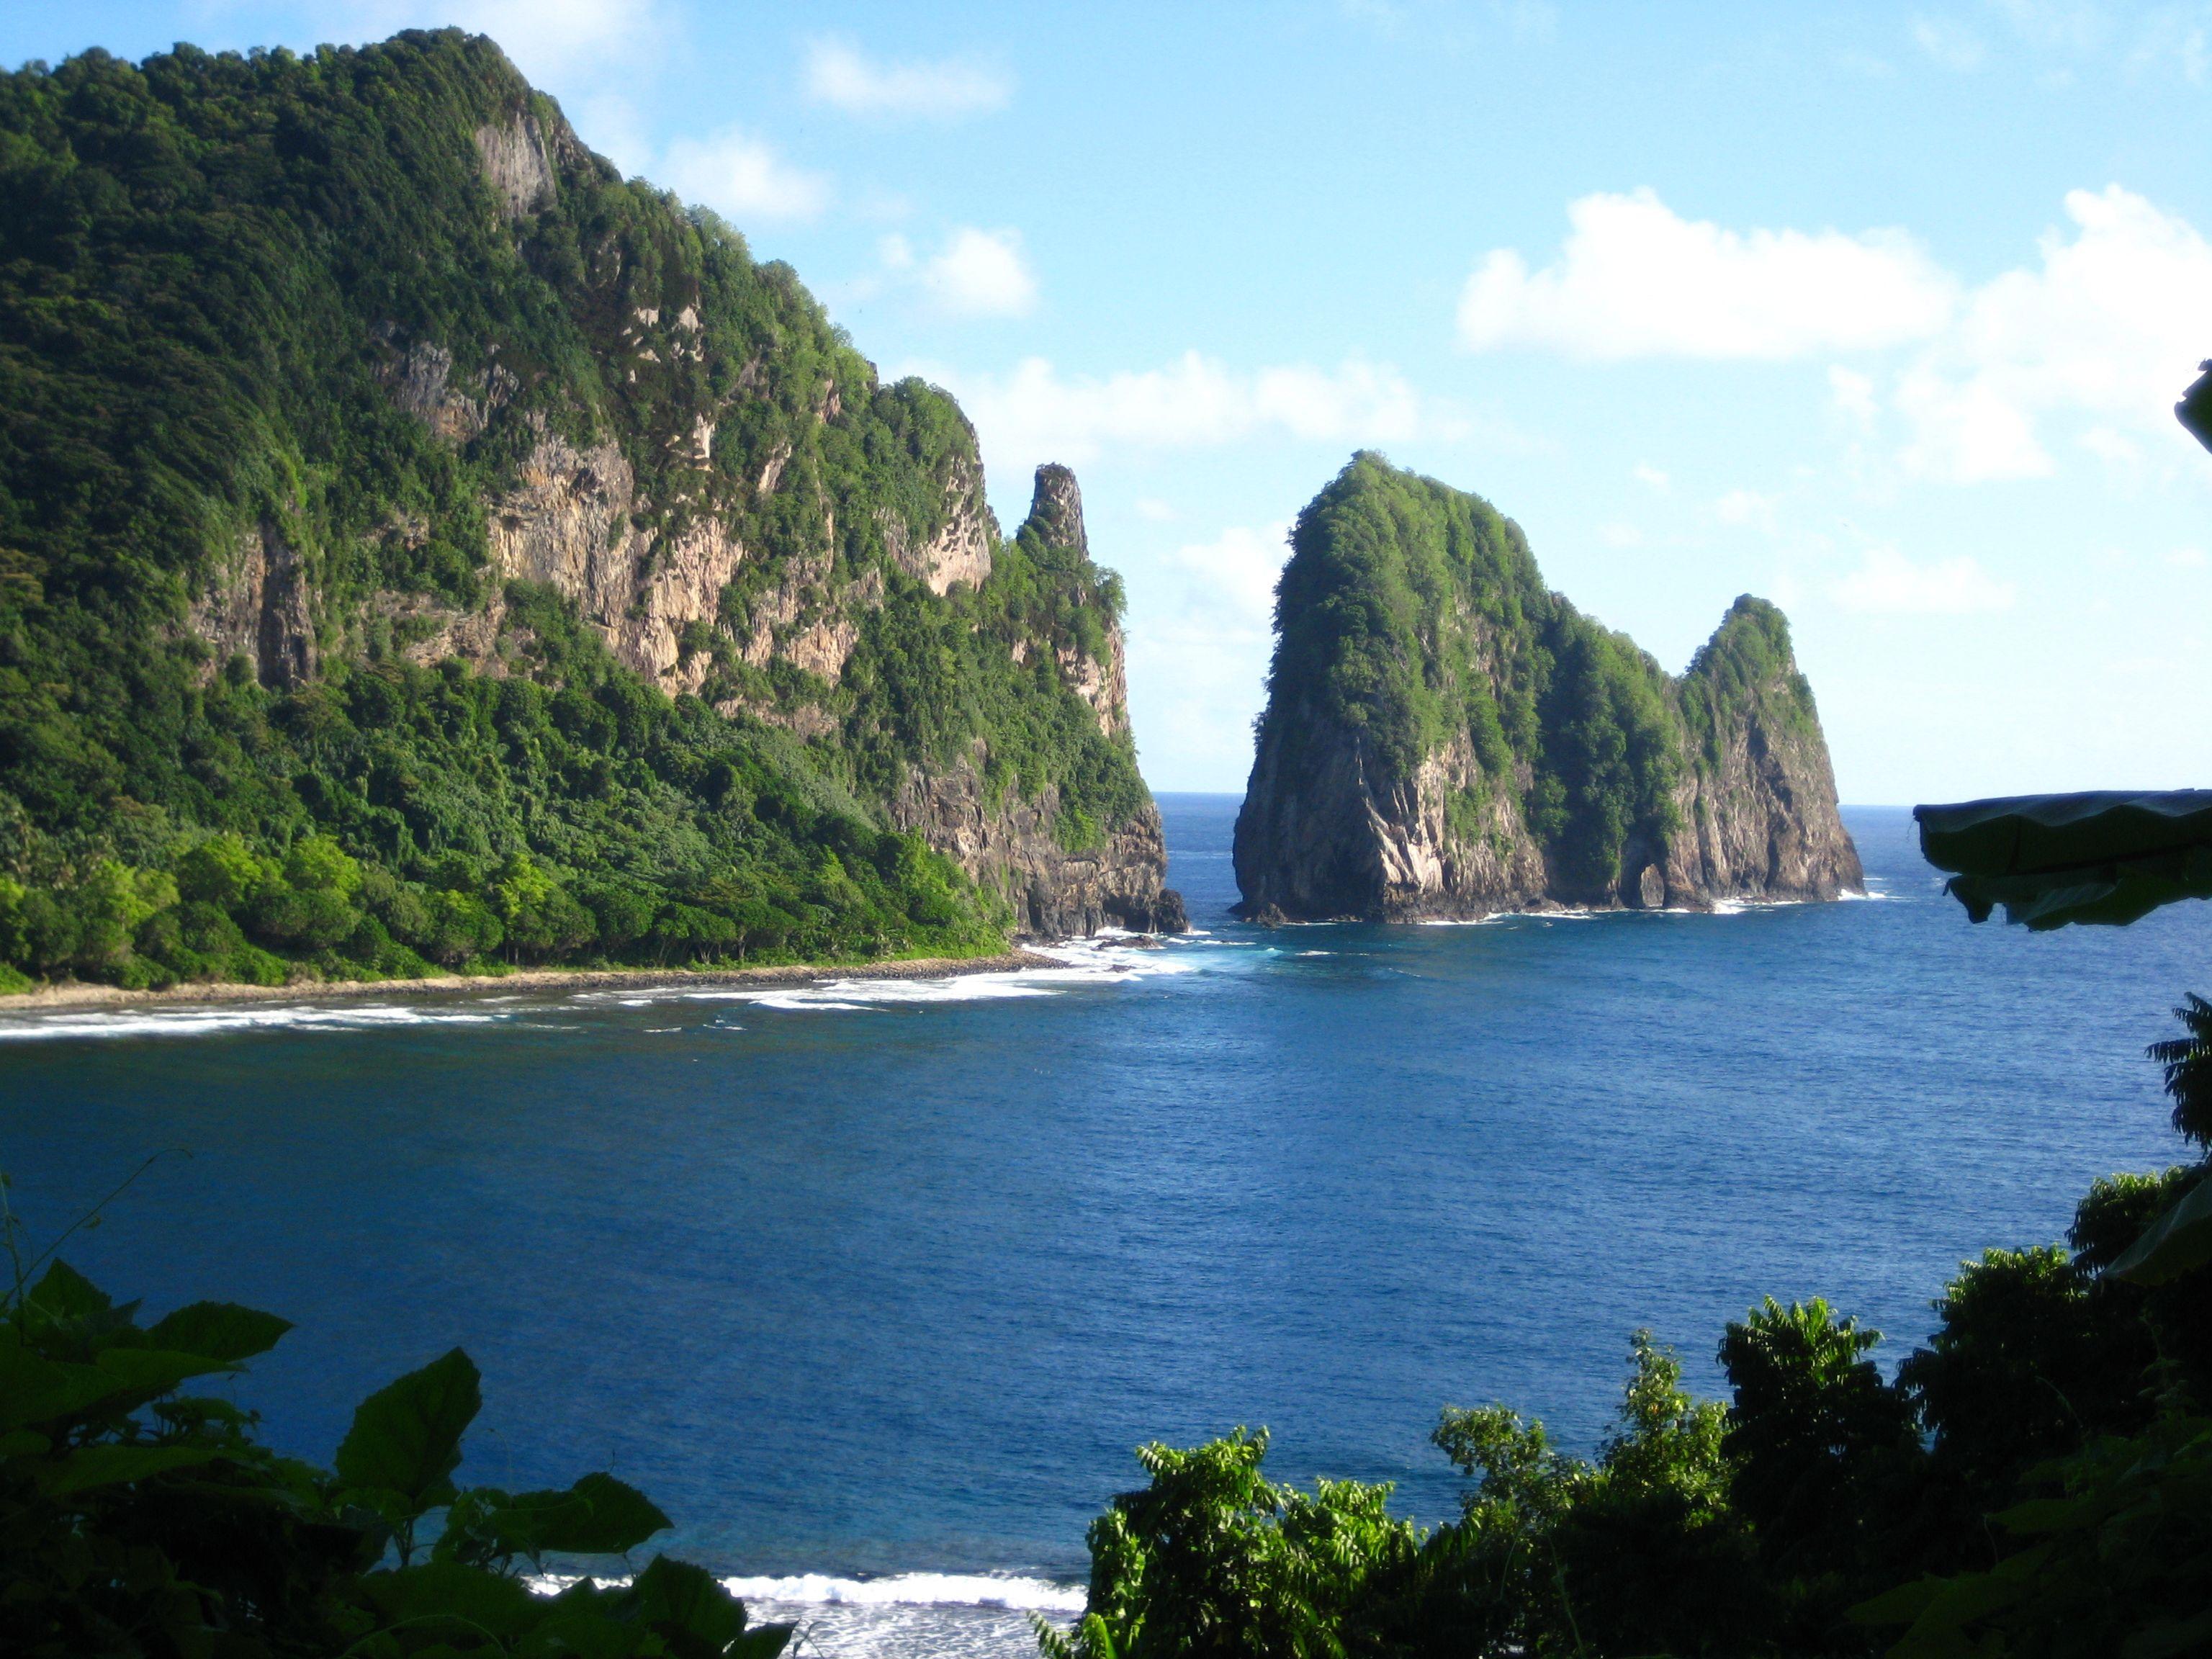 American Samoa (Places to Stay). I'd rather be riding